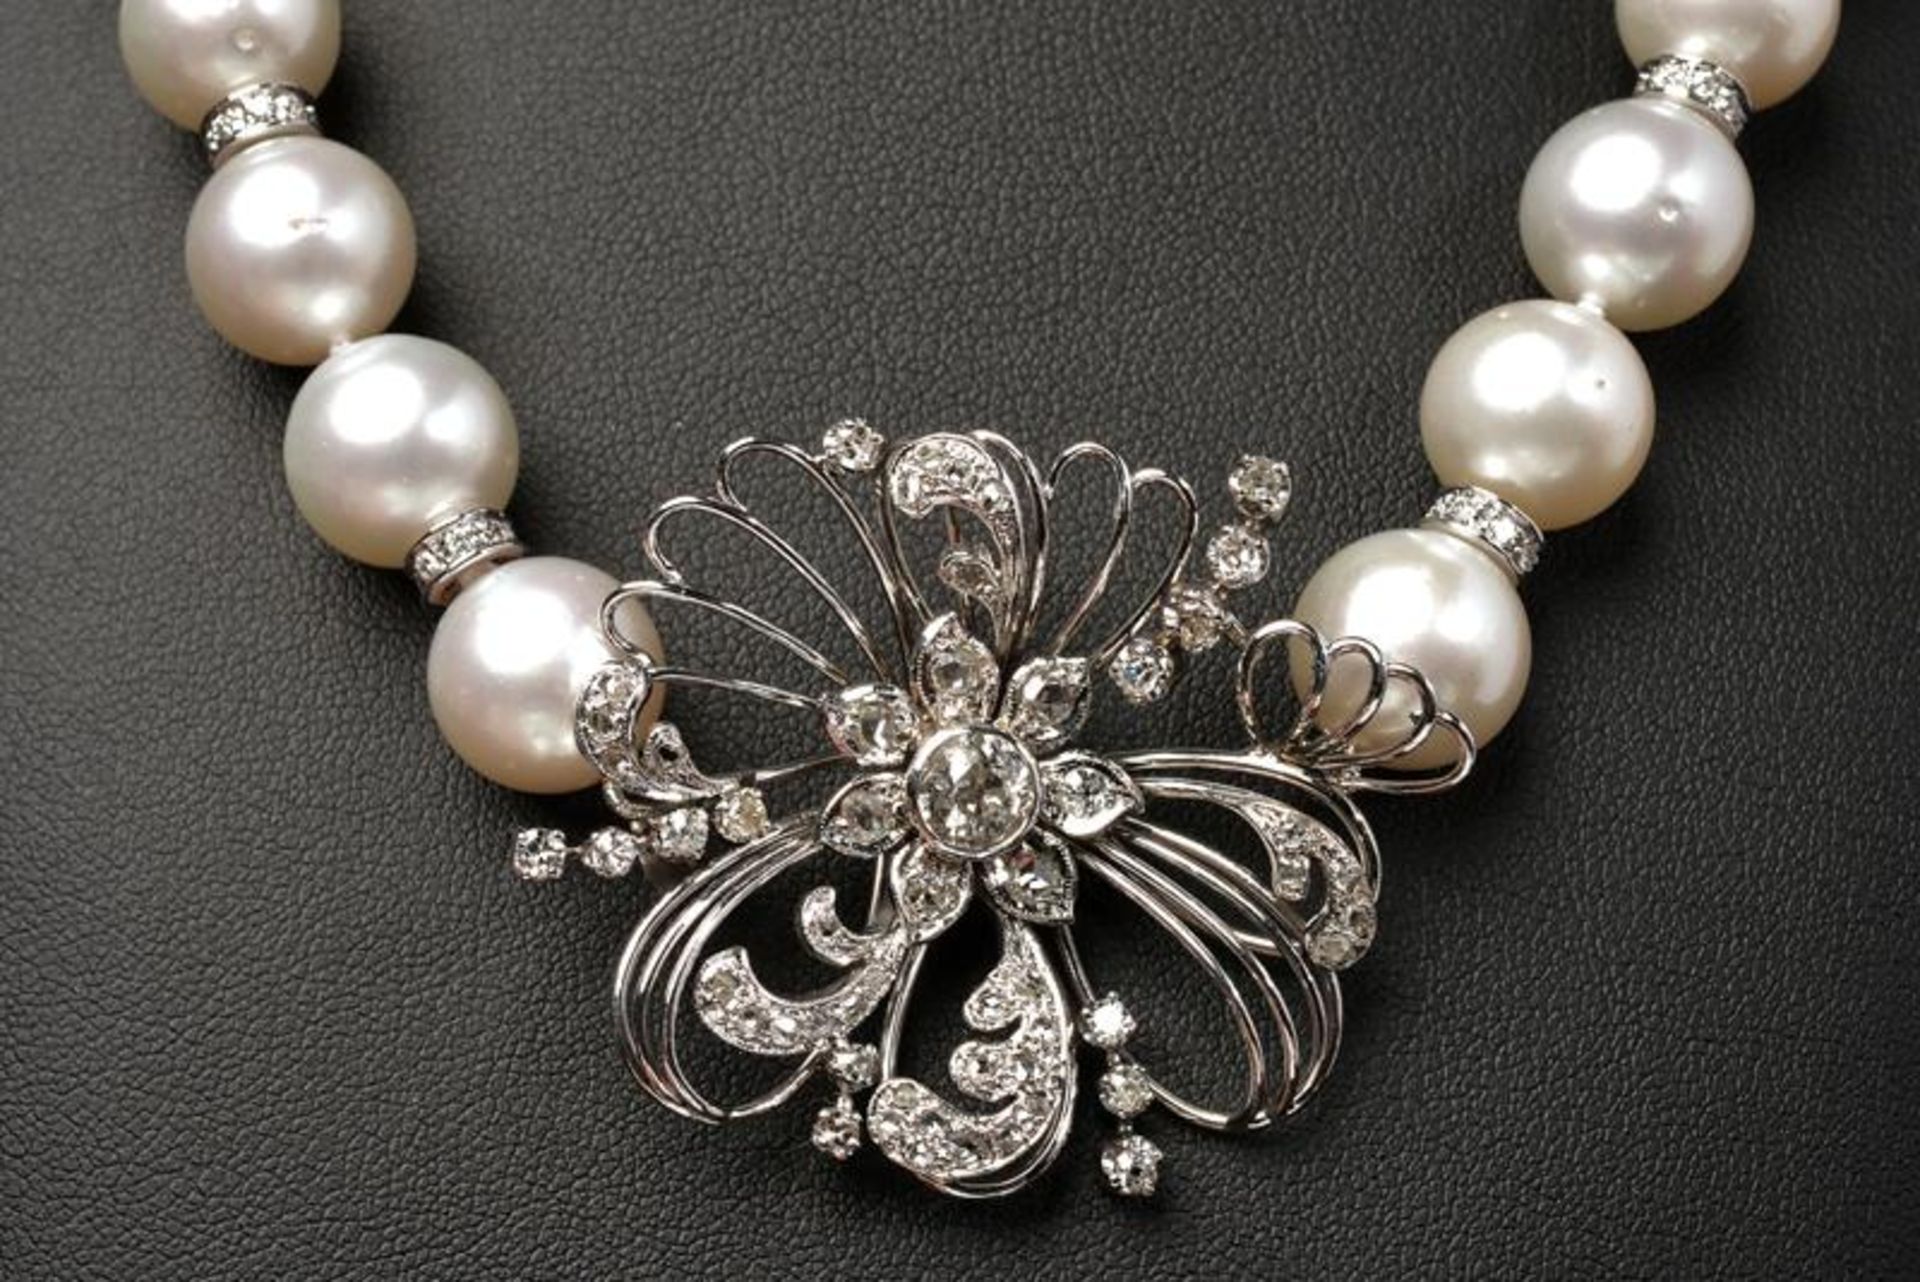 Australian pearl and diamond necklace - Image 2 of 3